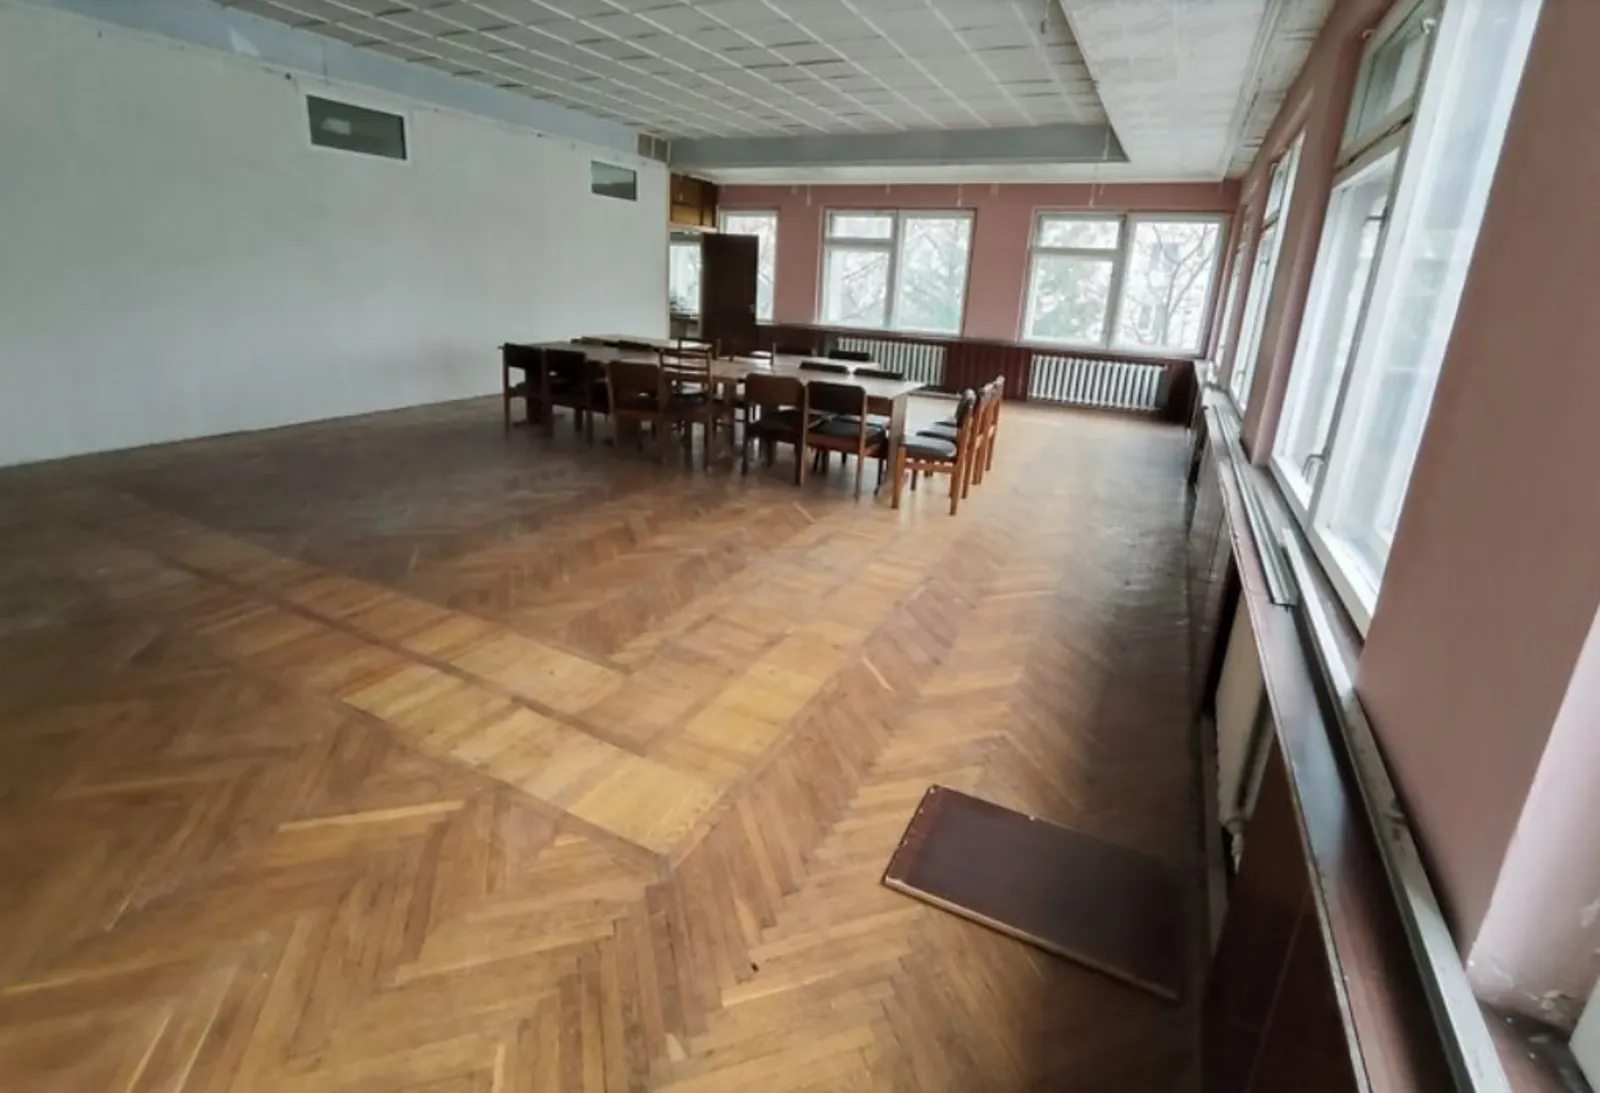 Real estate for sale for commercial purposes. 280 m², 2nd floor/2 floors. Medova vul., Ternopil. 